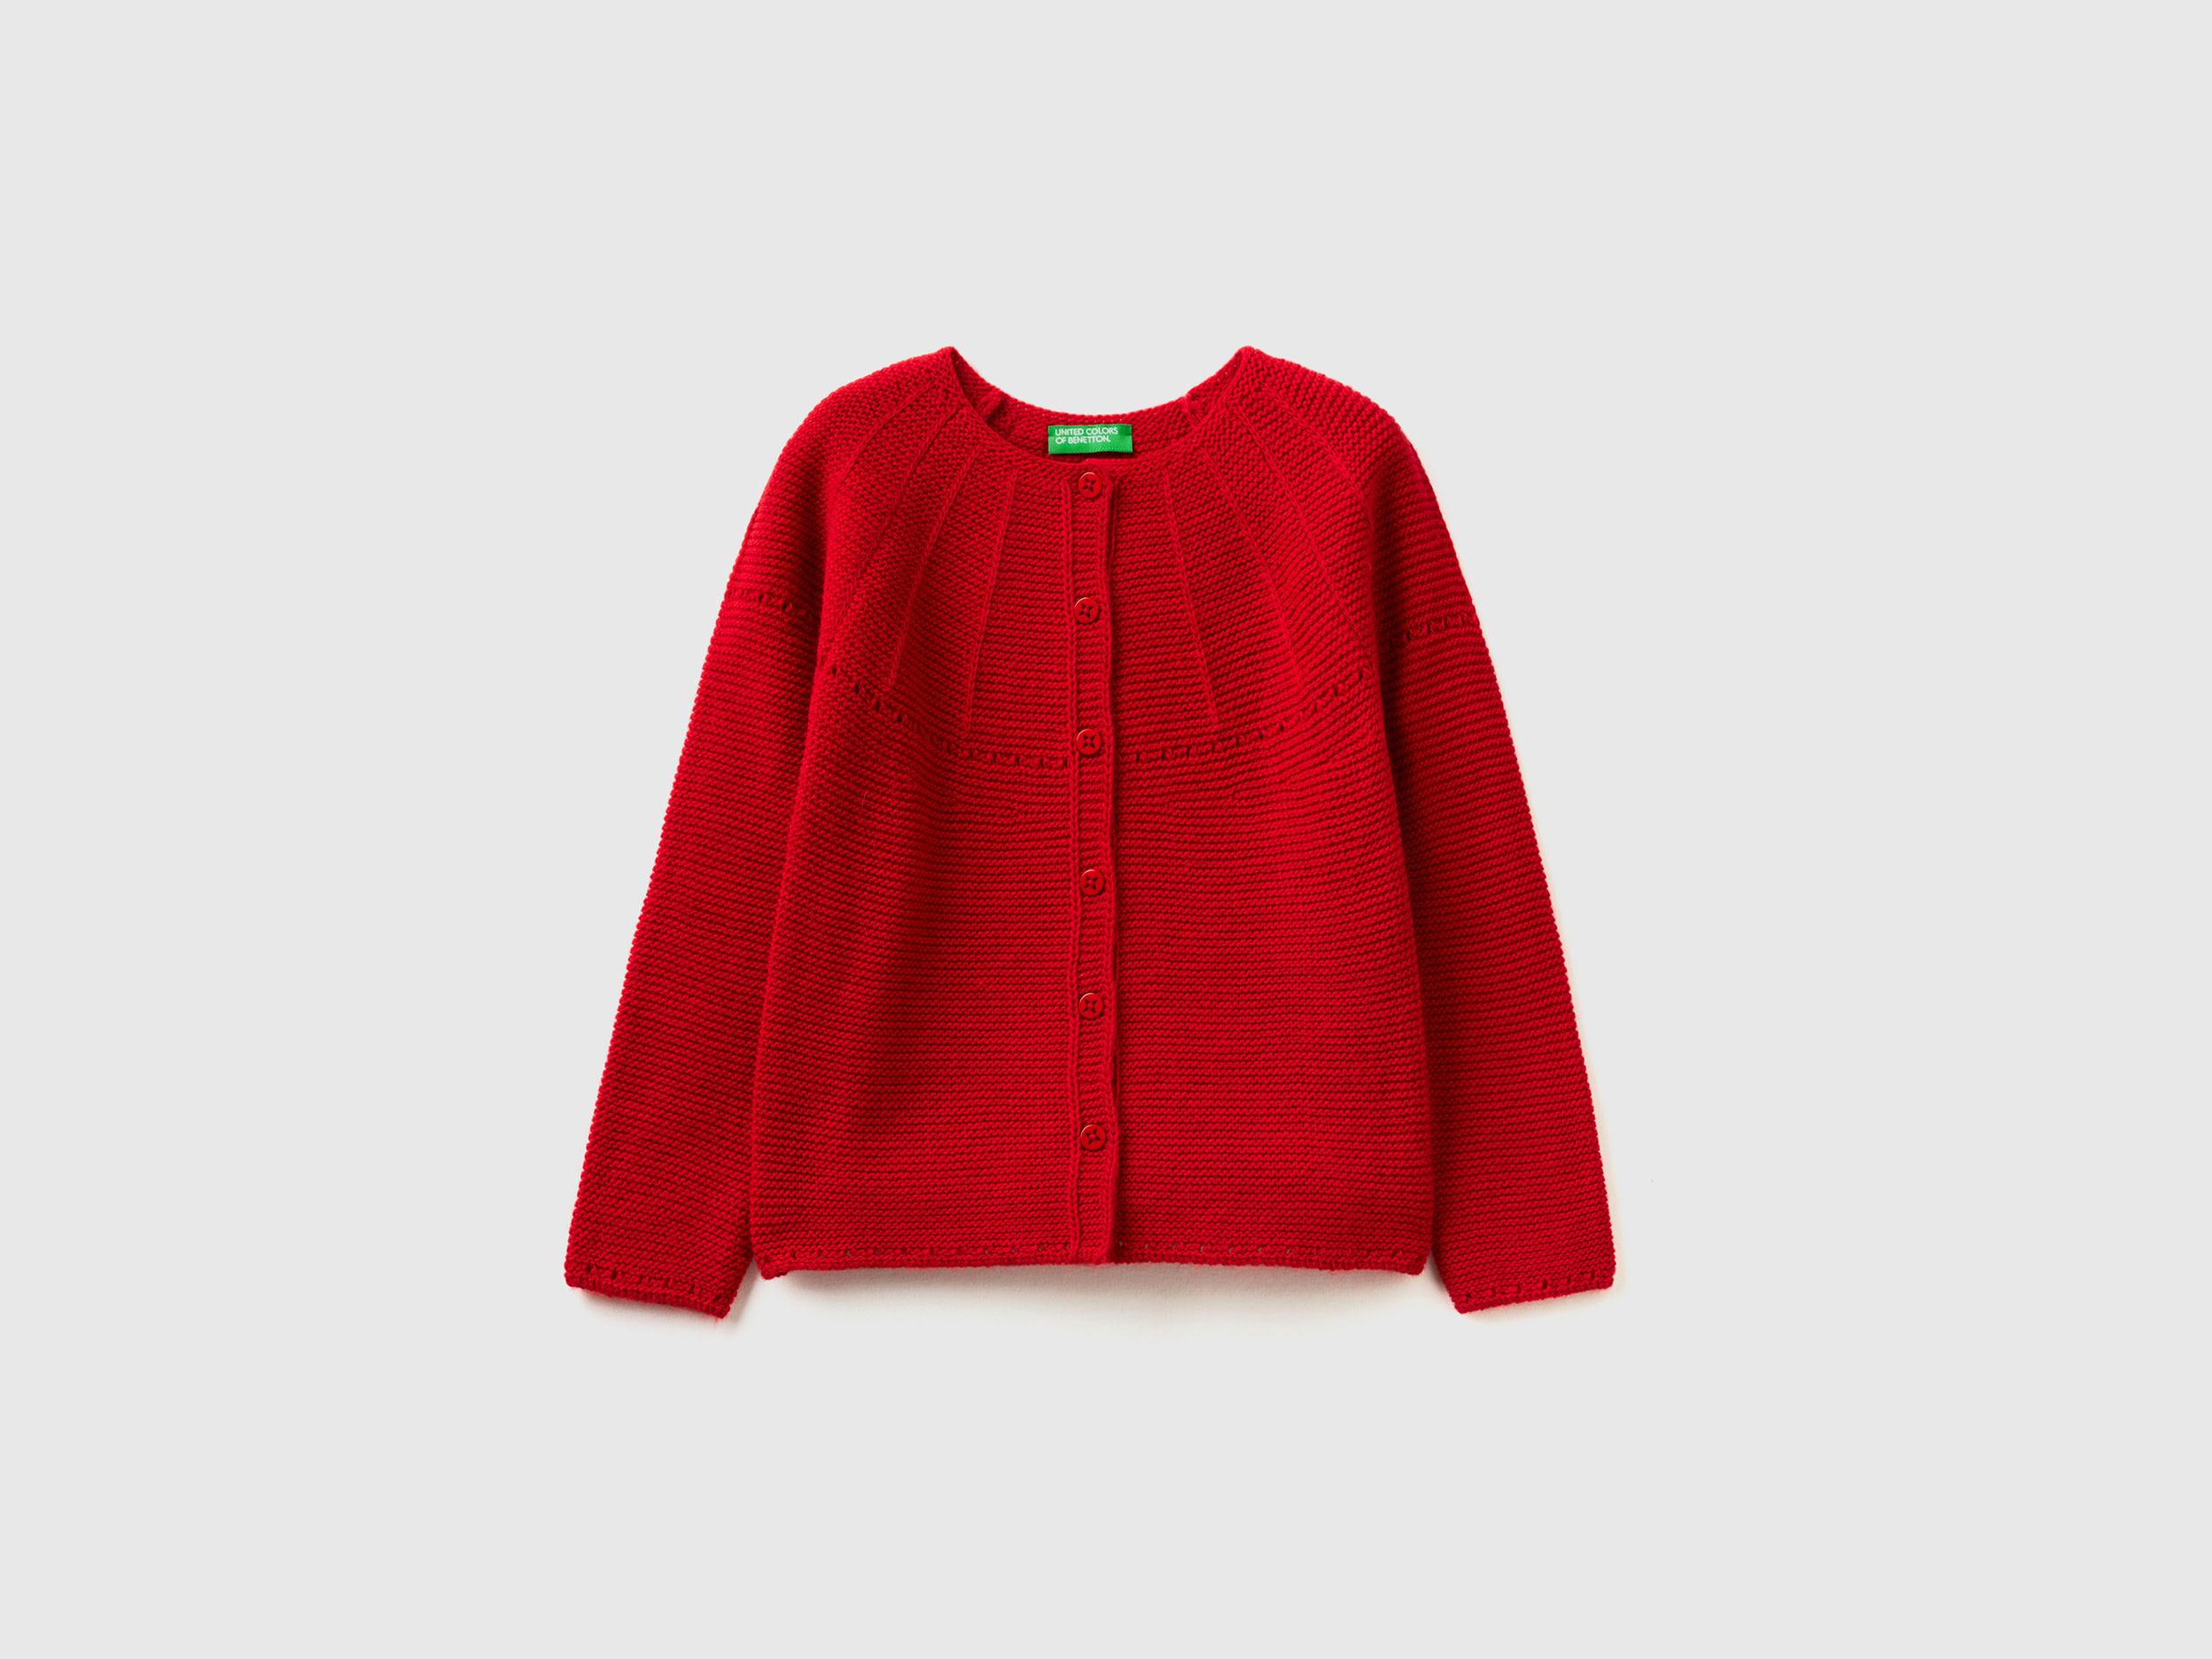 Benetton, Cardigan With Perforated Details, size 3-4, Red, Kids